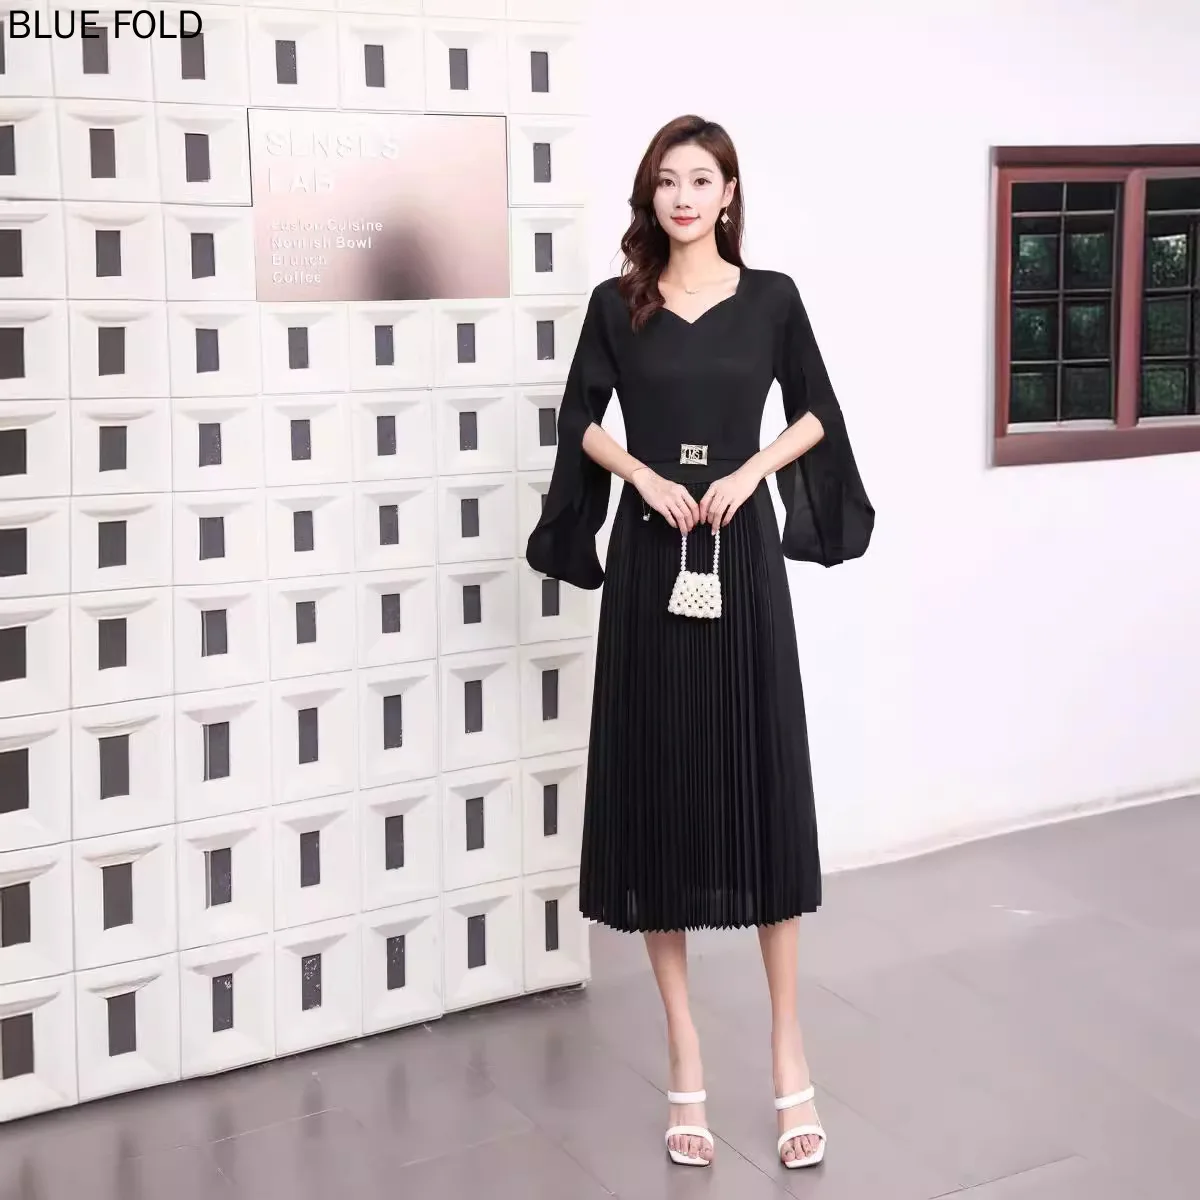 

Miyake Summer New Pleated V-neck Slit Bell Sleeve Solid Color Fashionable and Elegant Slim Fit Women's Dress PLEATS Vestido Robe